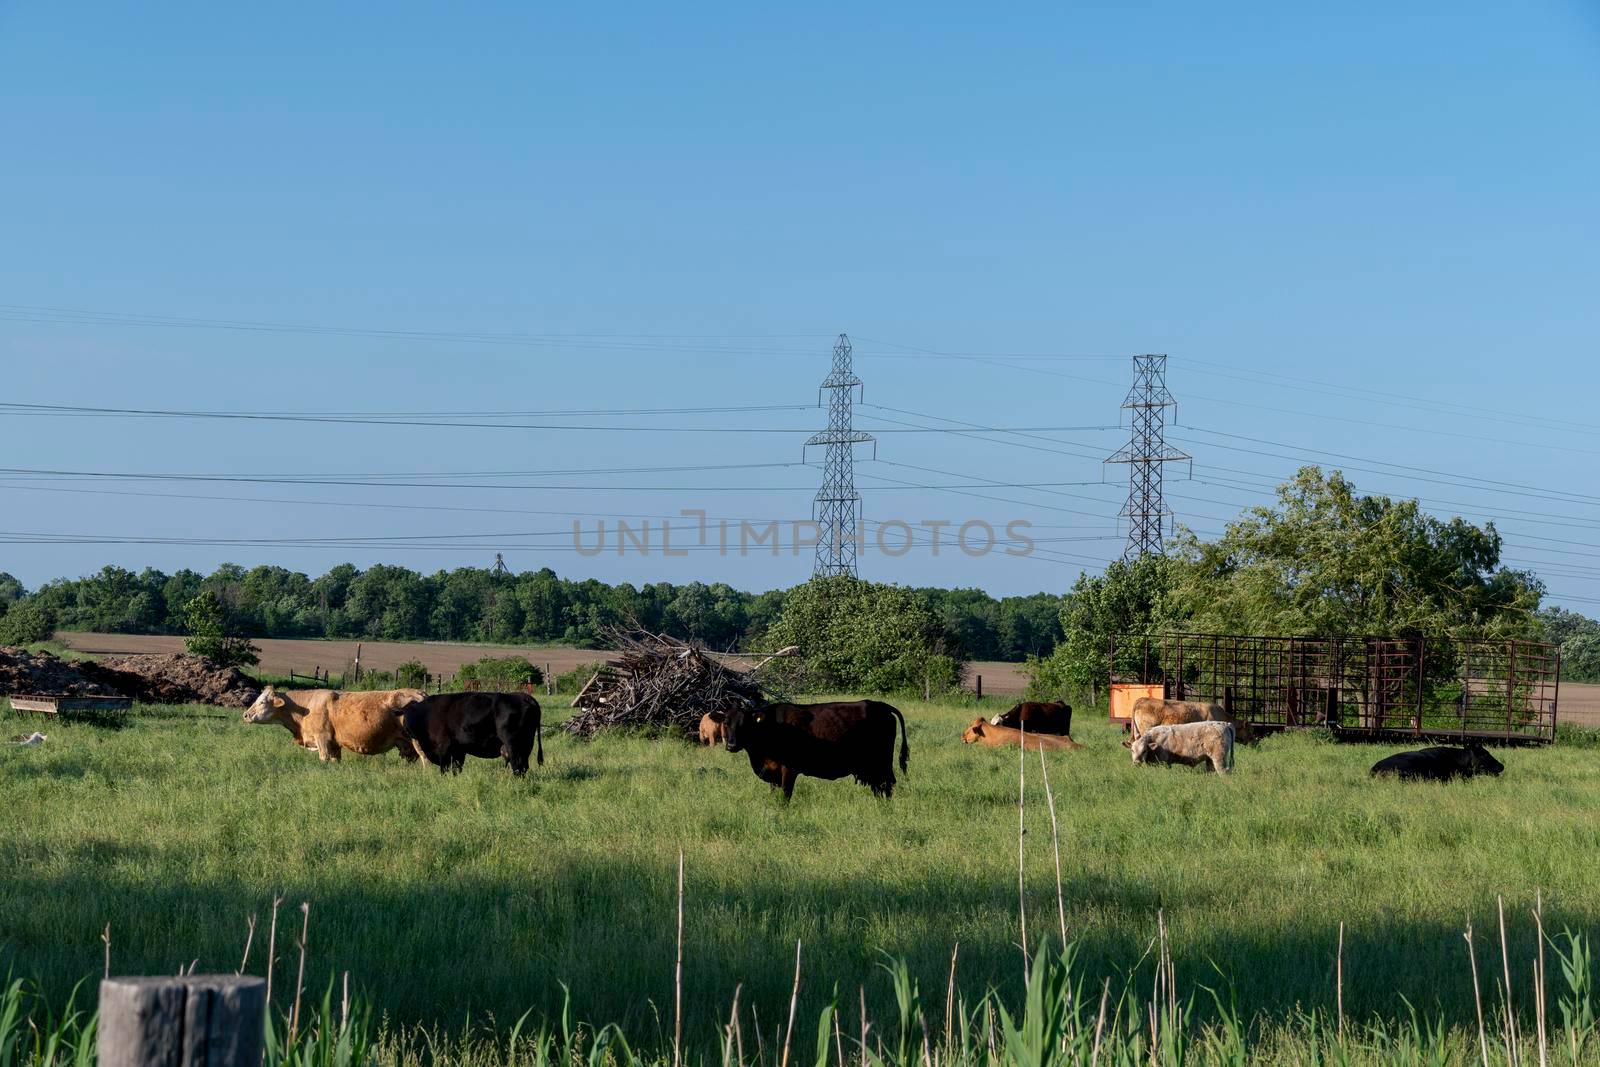 Cows graze near a corral in a meadow fenced off